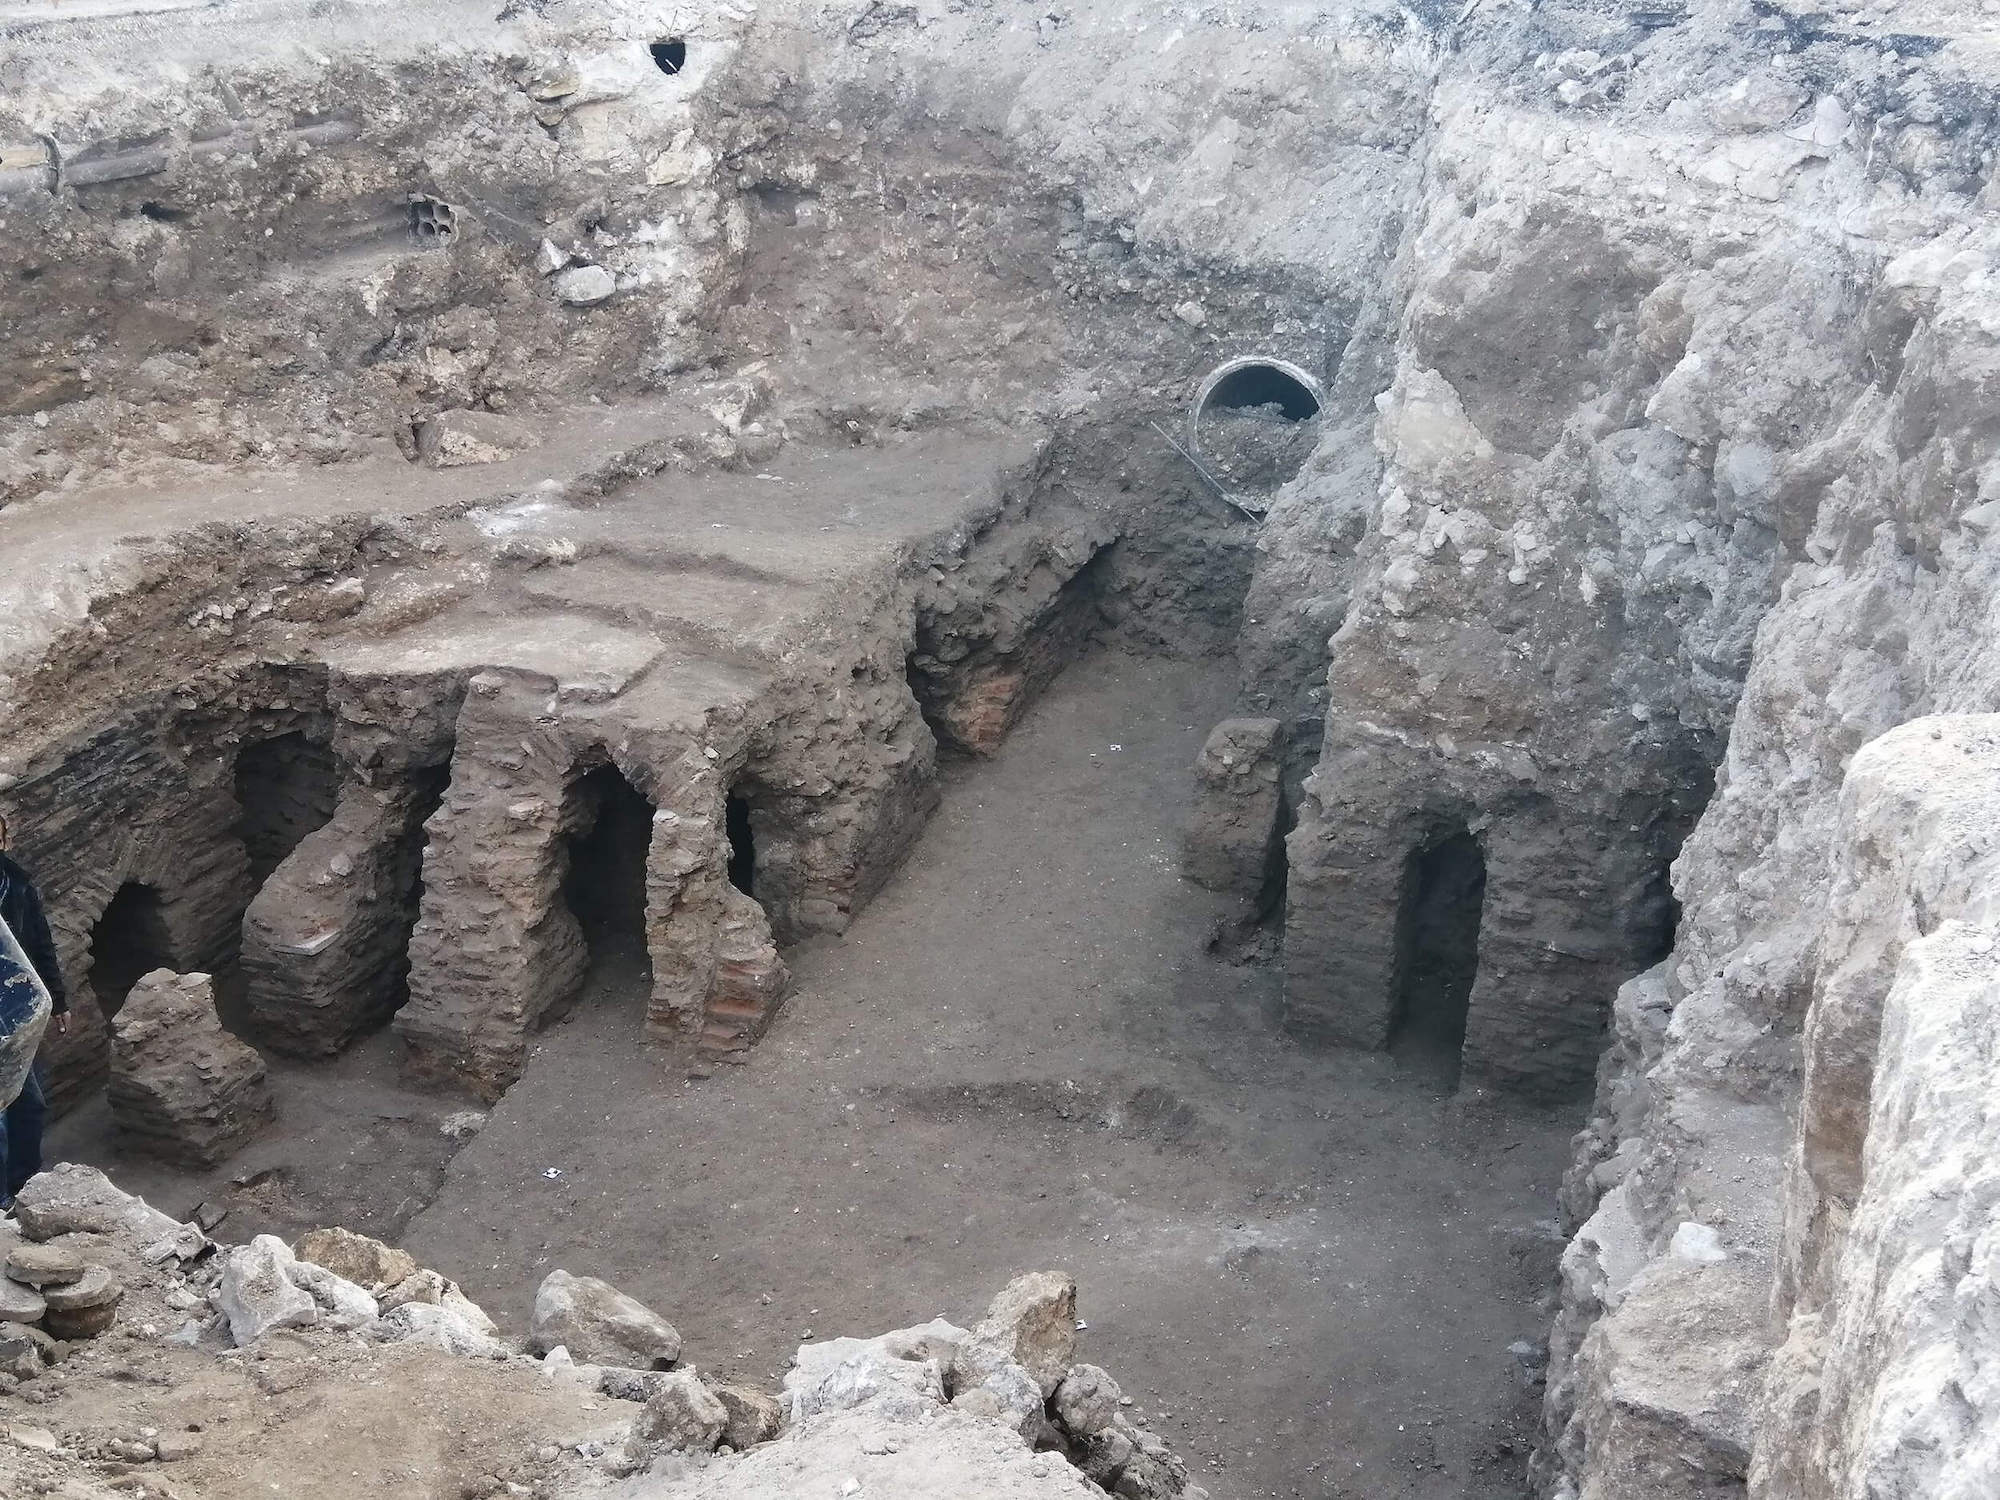 Fig. 6: Recently excavated Roman-period baths in downtown Amman (credit: Freedom's Falcon, licensed under CC BY-SA 4.0).